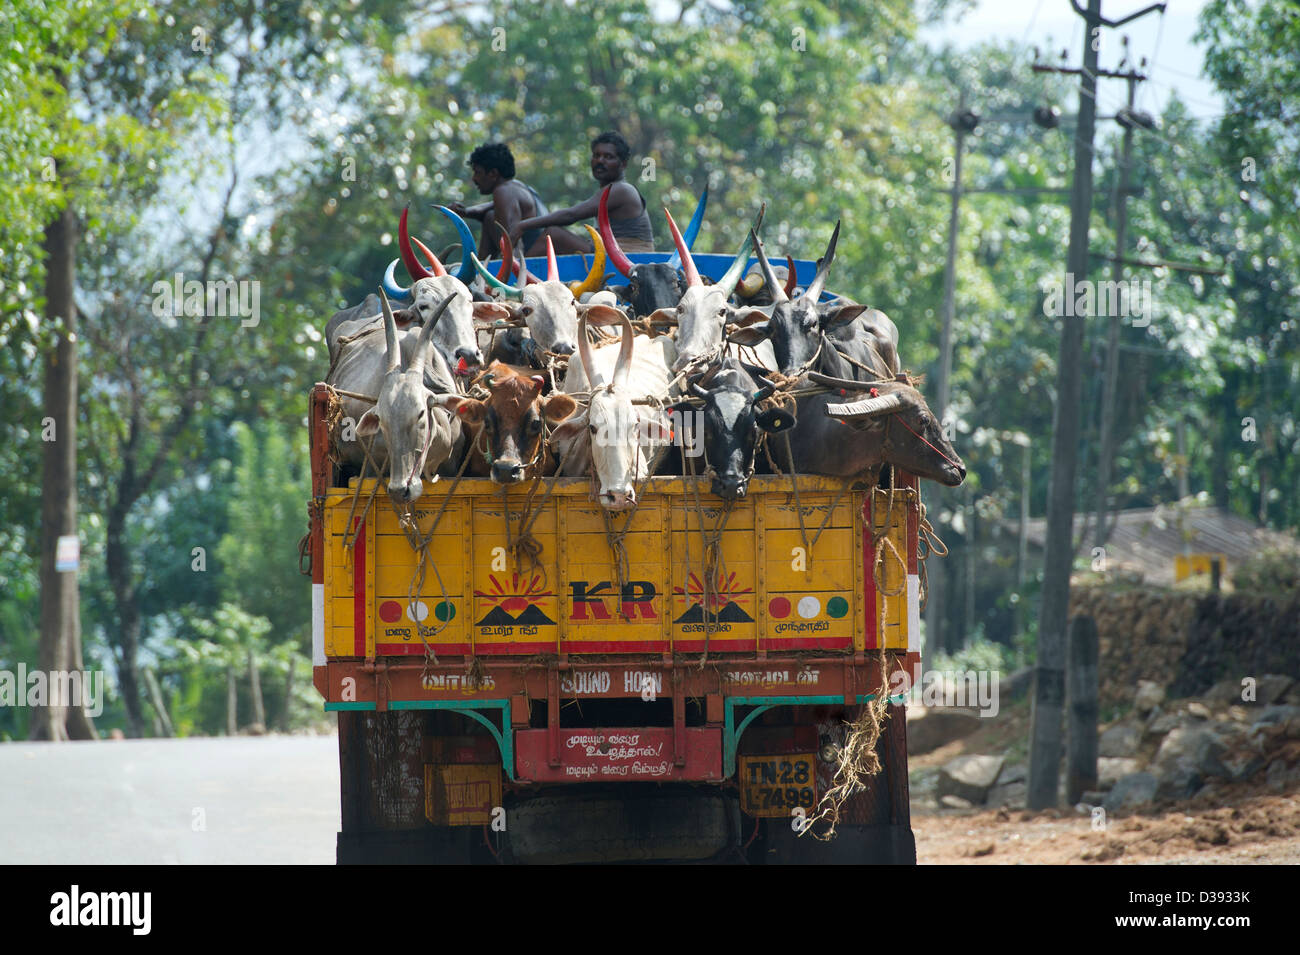 Cattle being transported in a truck through the foothills of the Western Ghats in Kerala, India Stock Photo